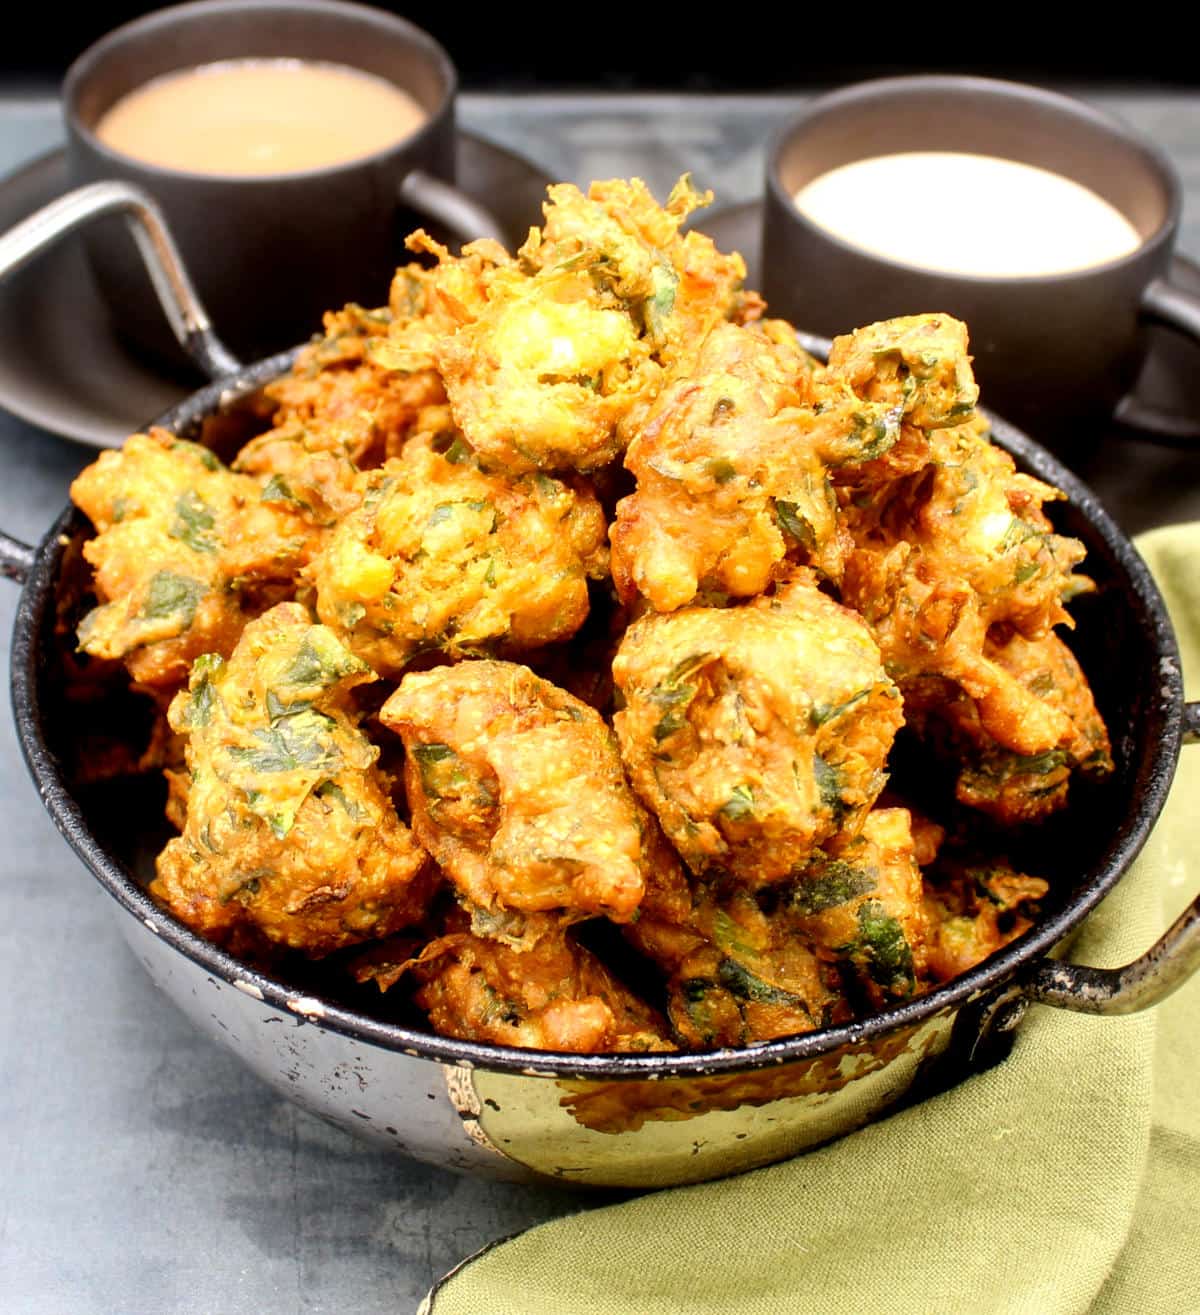 Golden pakora fritters in karahi bowl with cups of chai in background.